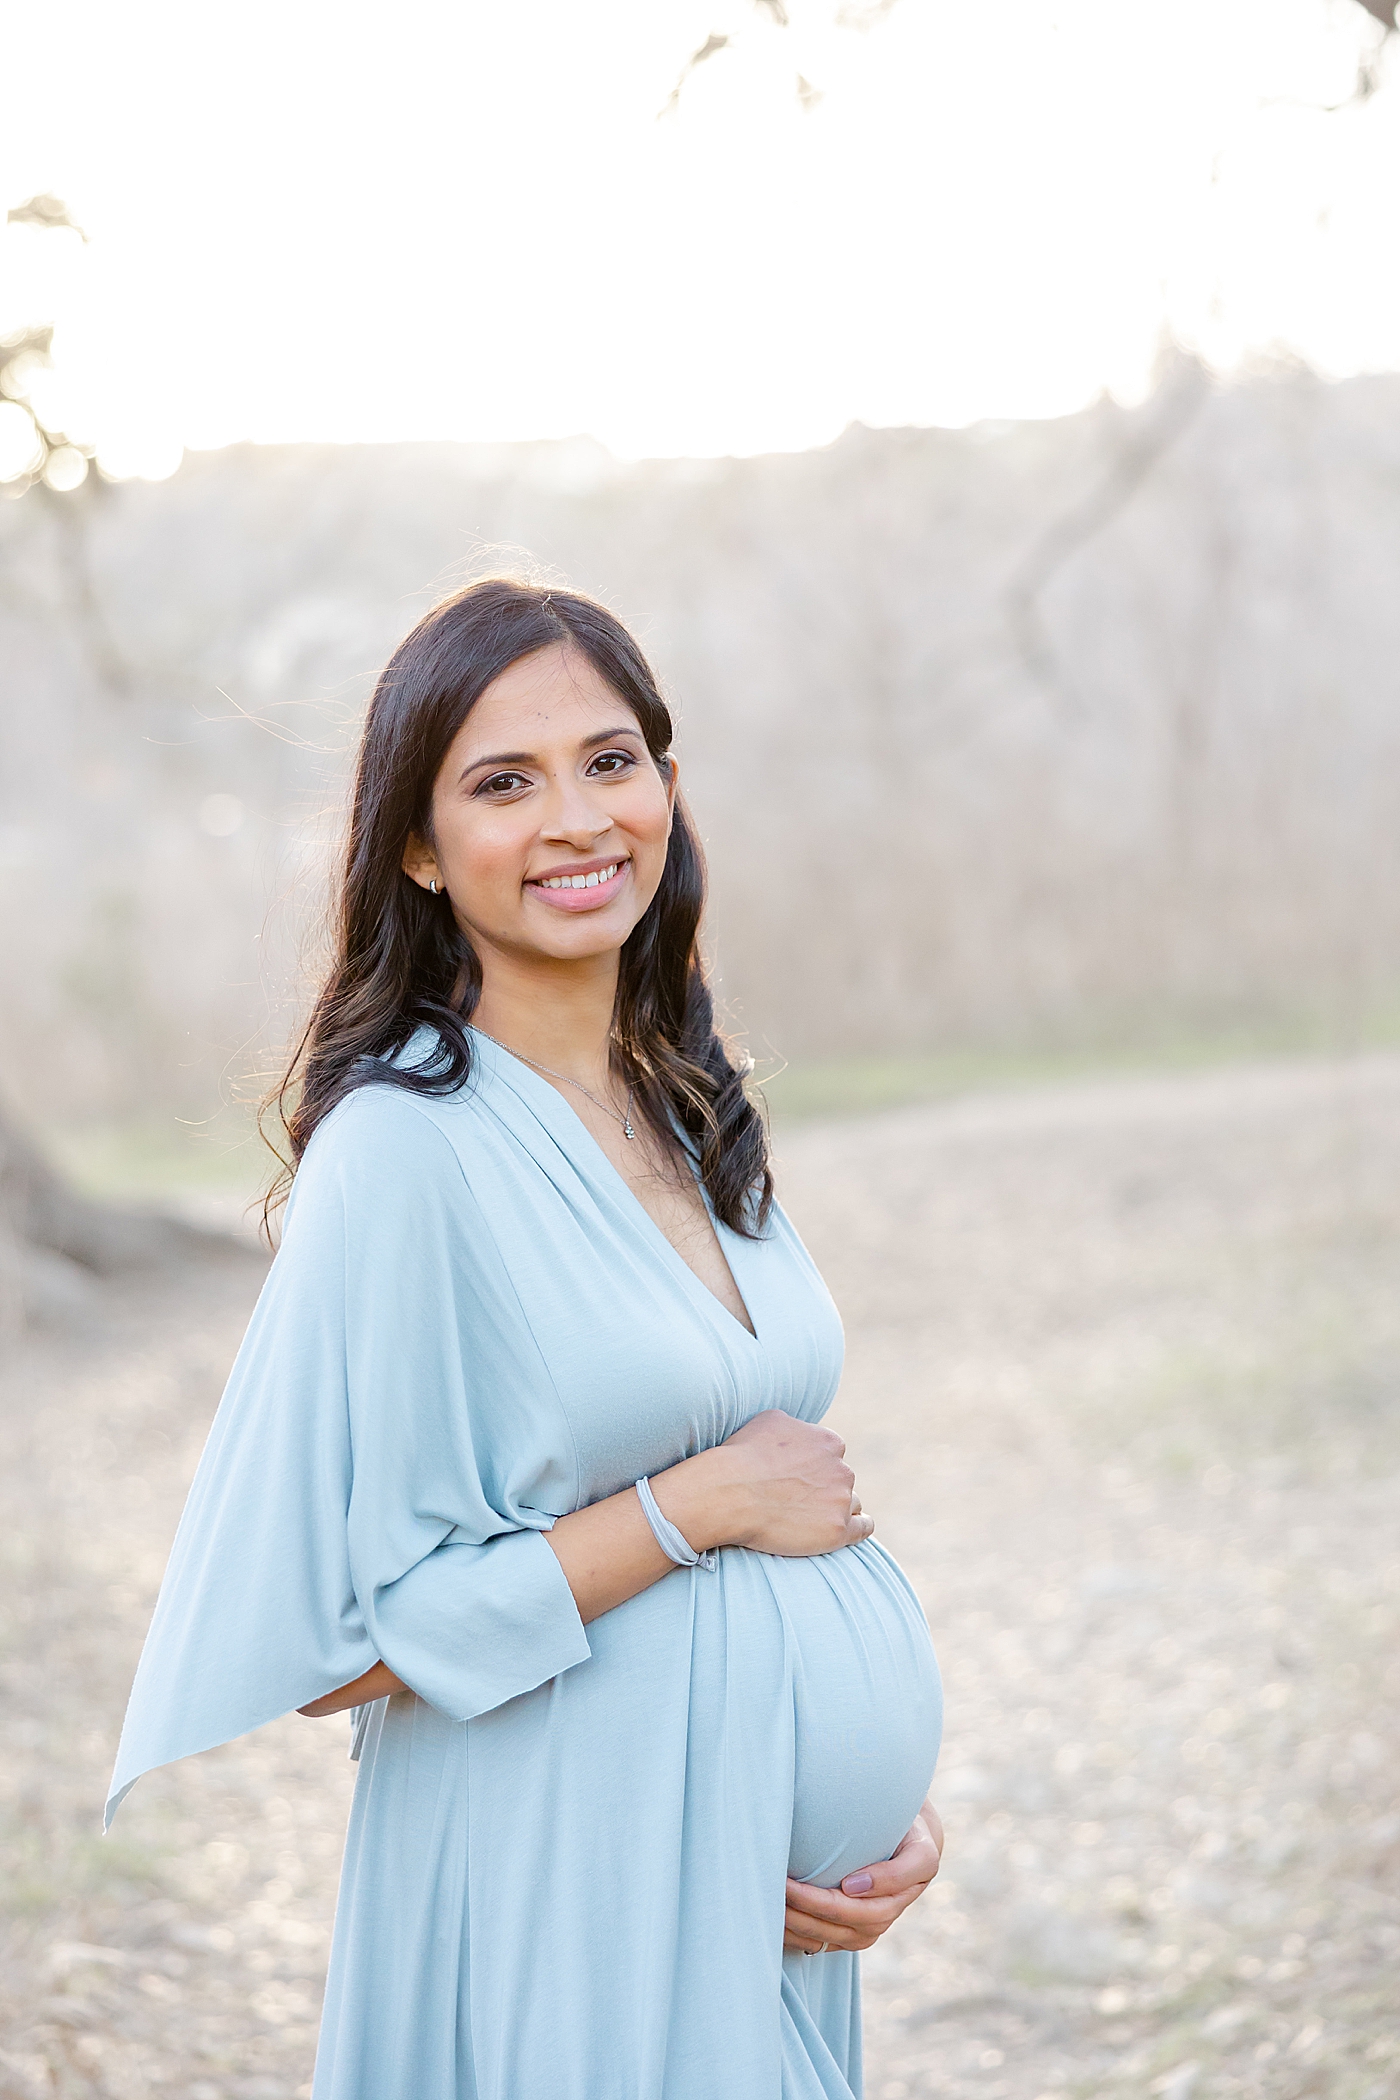 Mom to be in a blue dress smiling | Images by Sana Ahmed 